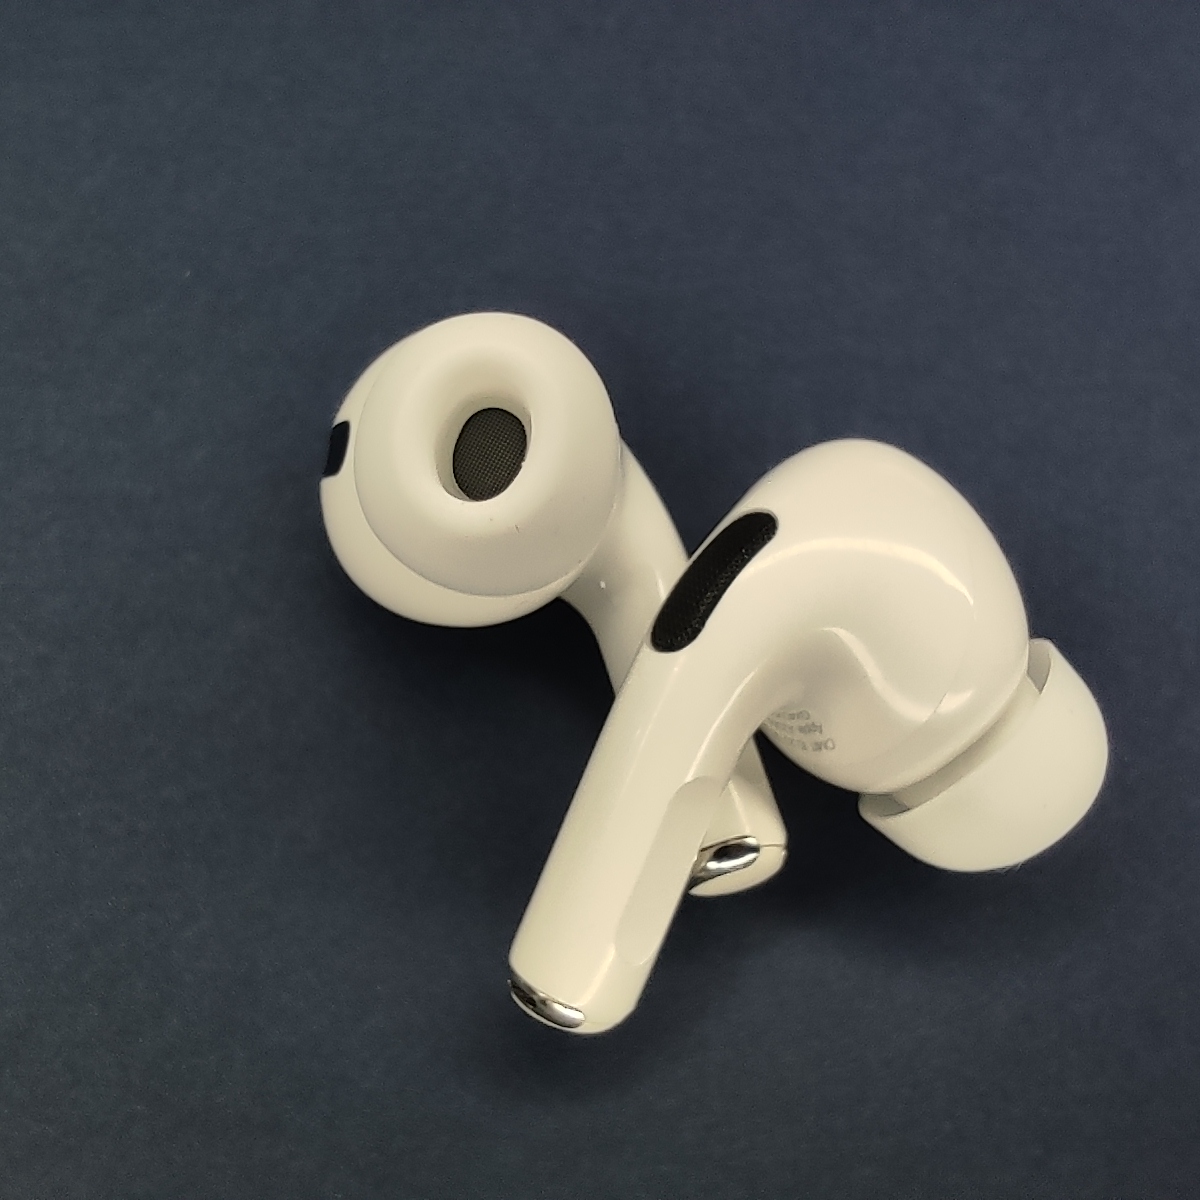 【 Apple】AirPods Pro（第1世代）A2084/A2190